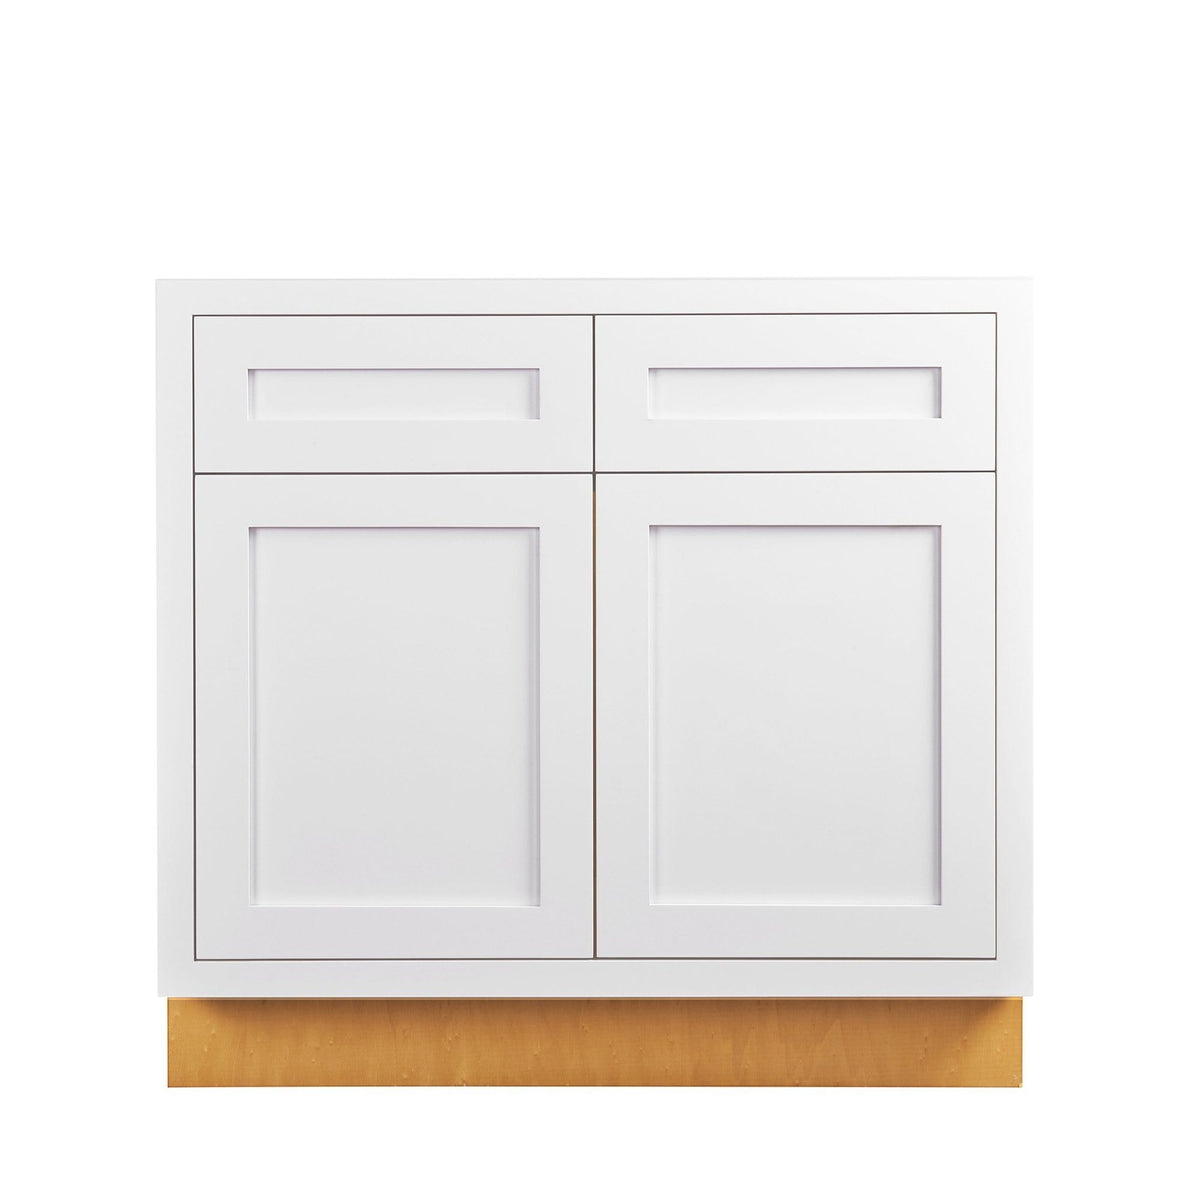 Sink Base Snow White Inset Shaker Cabinets 33", 36", 42"